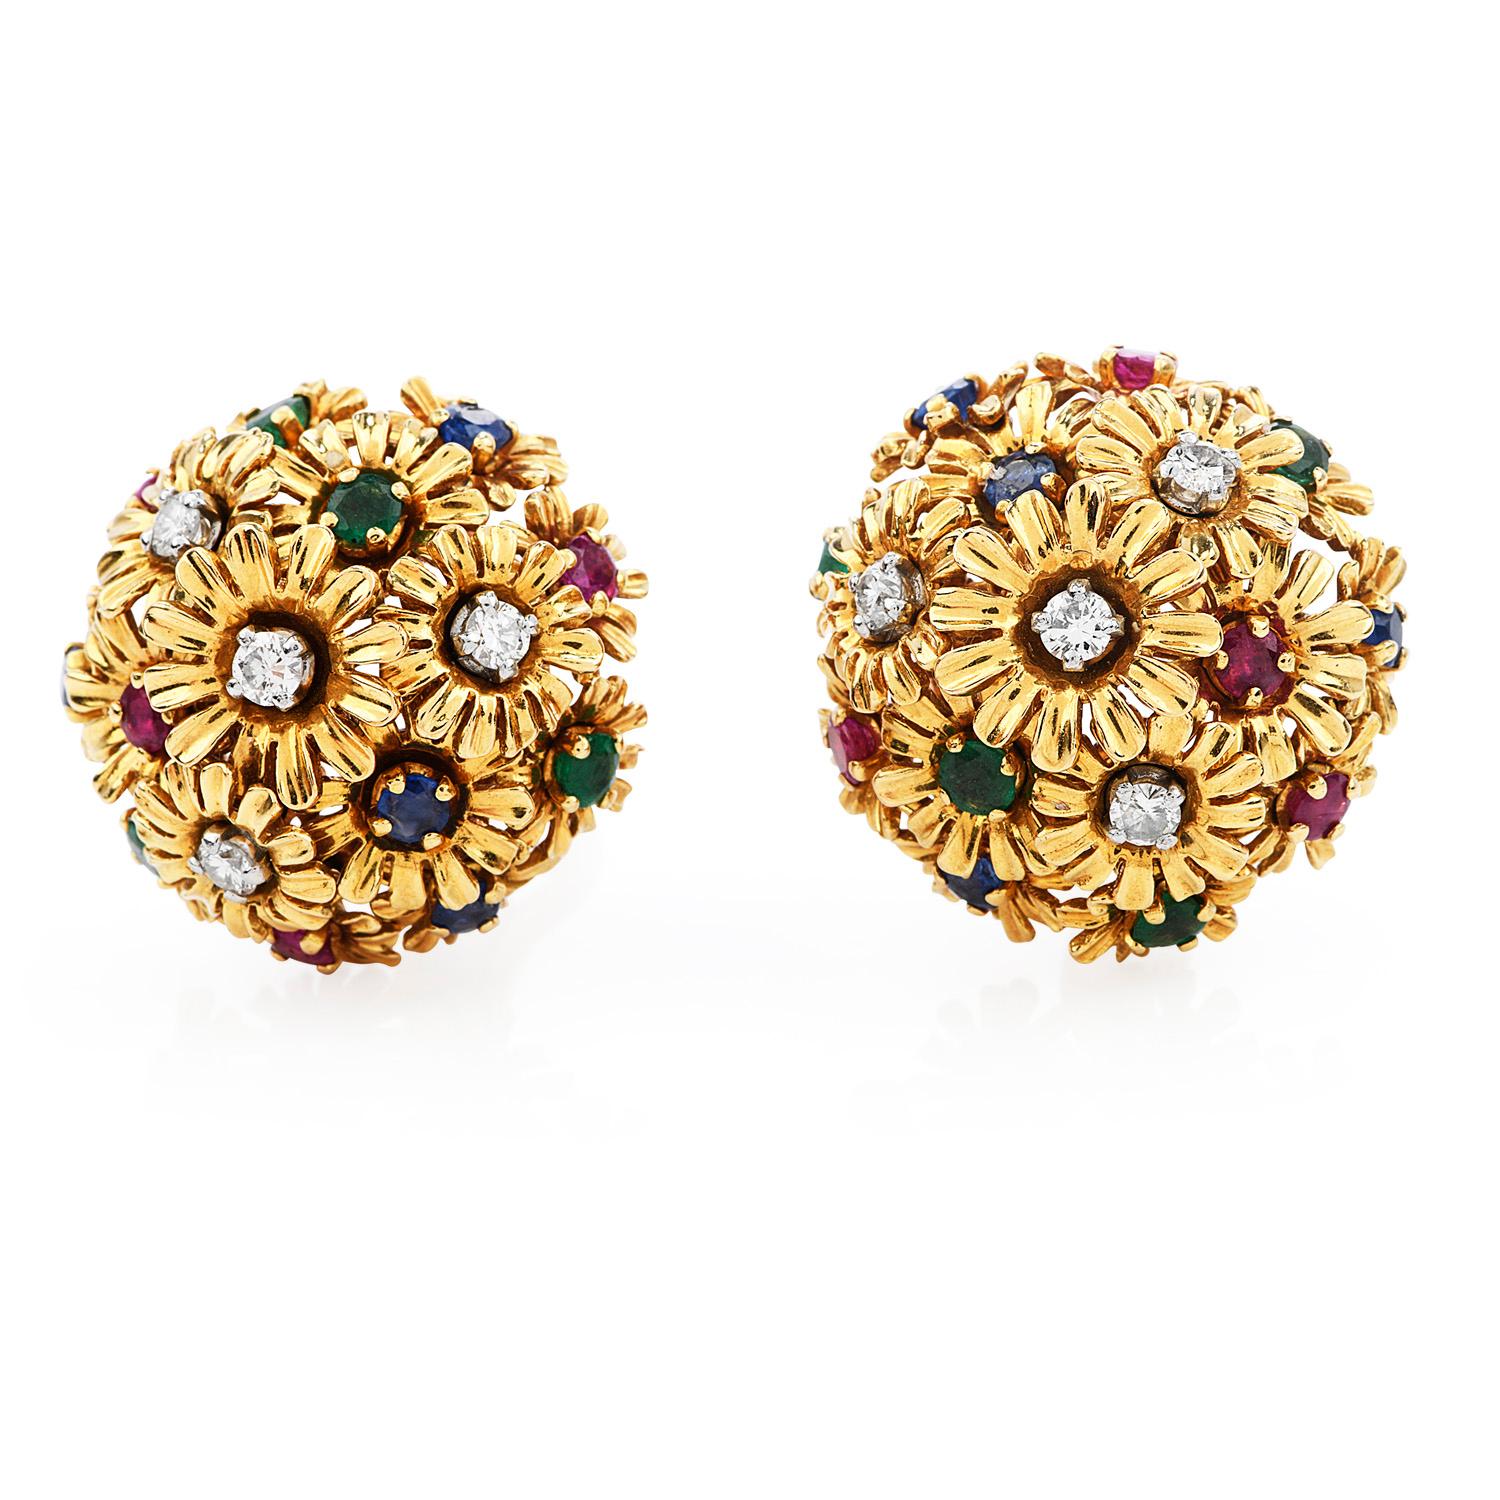 See life in Vivid colors with these exquisite 1960s Diamond, Ruby, Sapphire, and Emerald Floral Clip On Earrings

with a total approximate weight of 30.9 grams.

Expertly Crafted in Solid 18K yellow gold, this piece is composed by

(8) Genuine